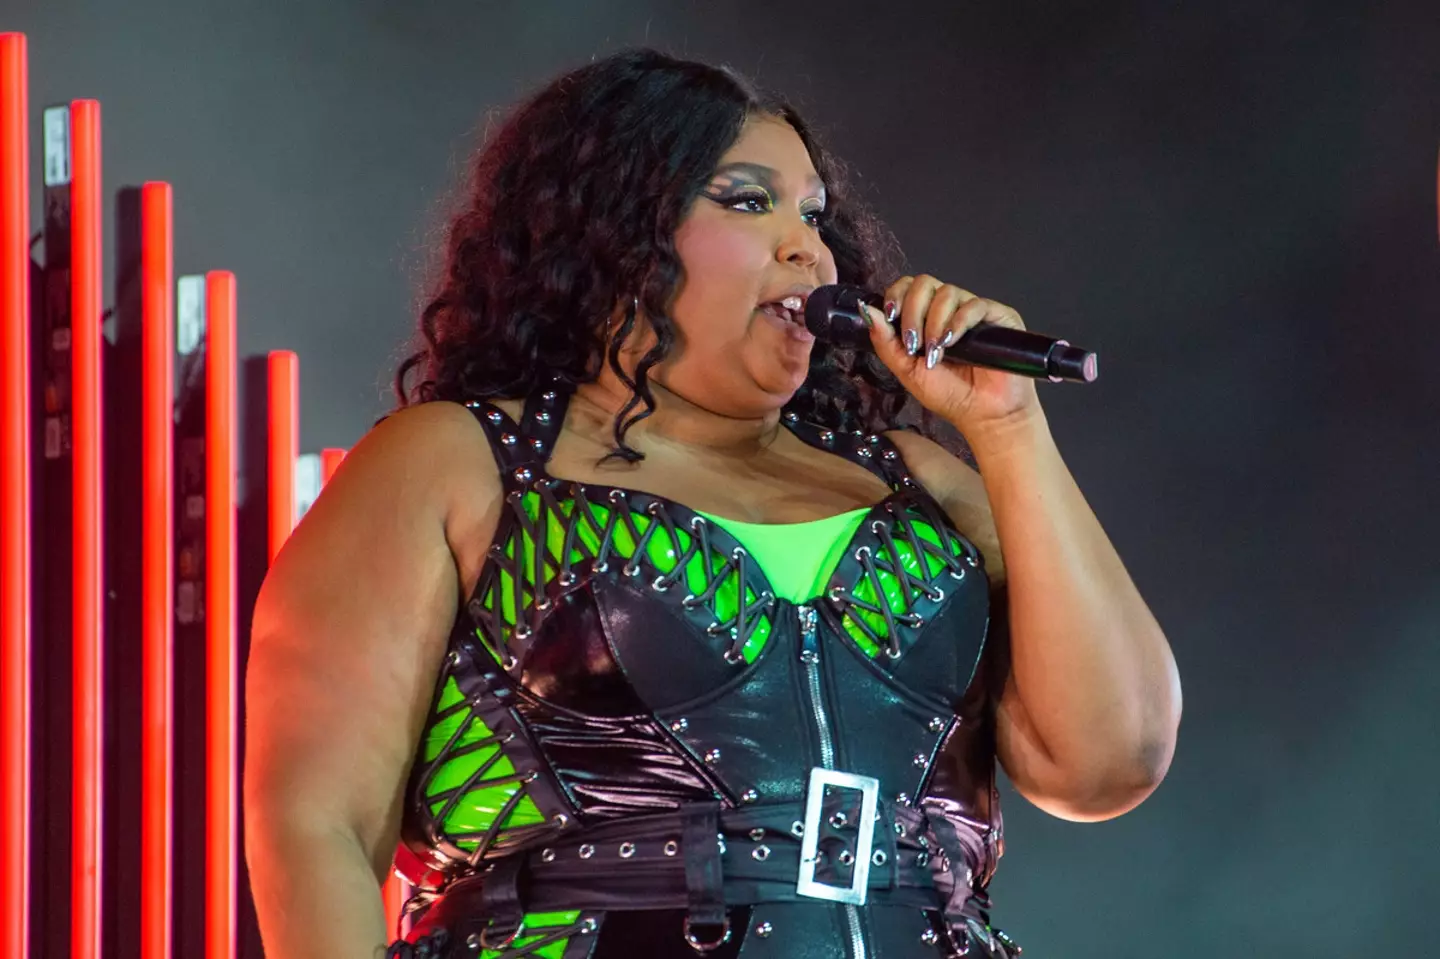 Lizzo is yet to speak out.